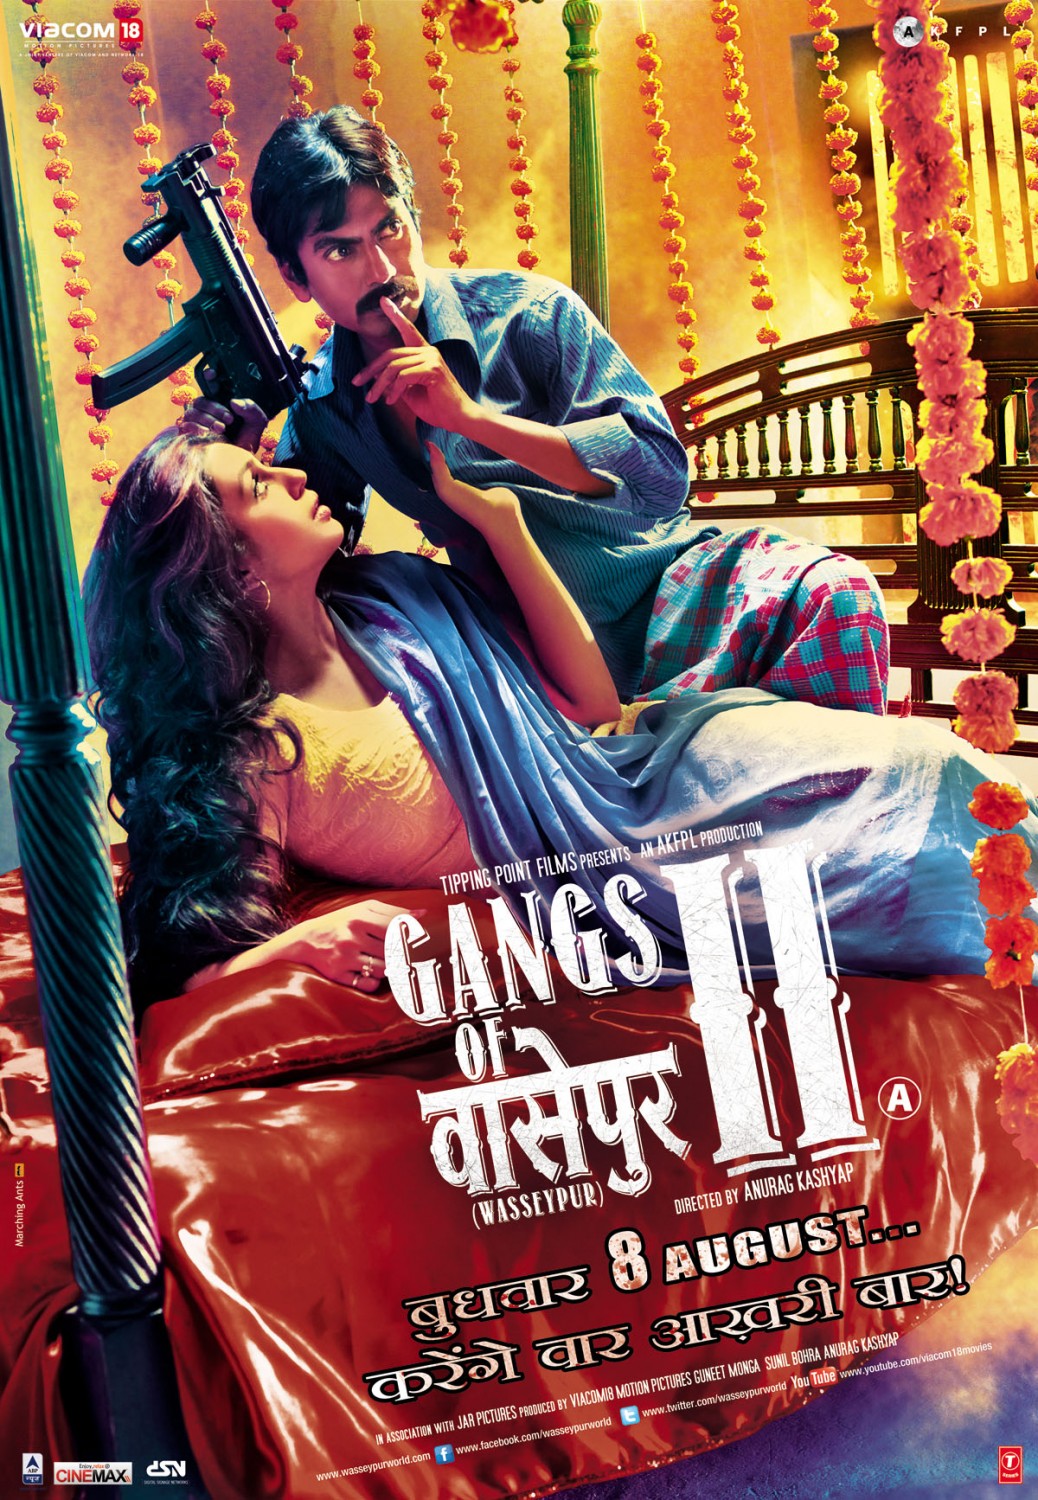 Extra Large Movie Poster Image for Gangs of Wasseypur II (#3 of 4)